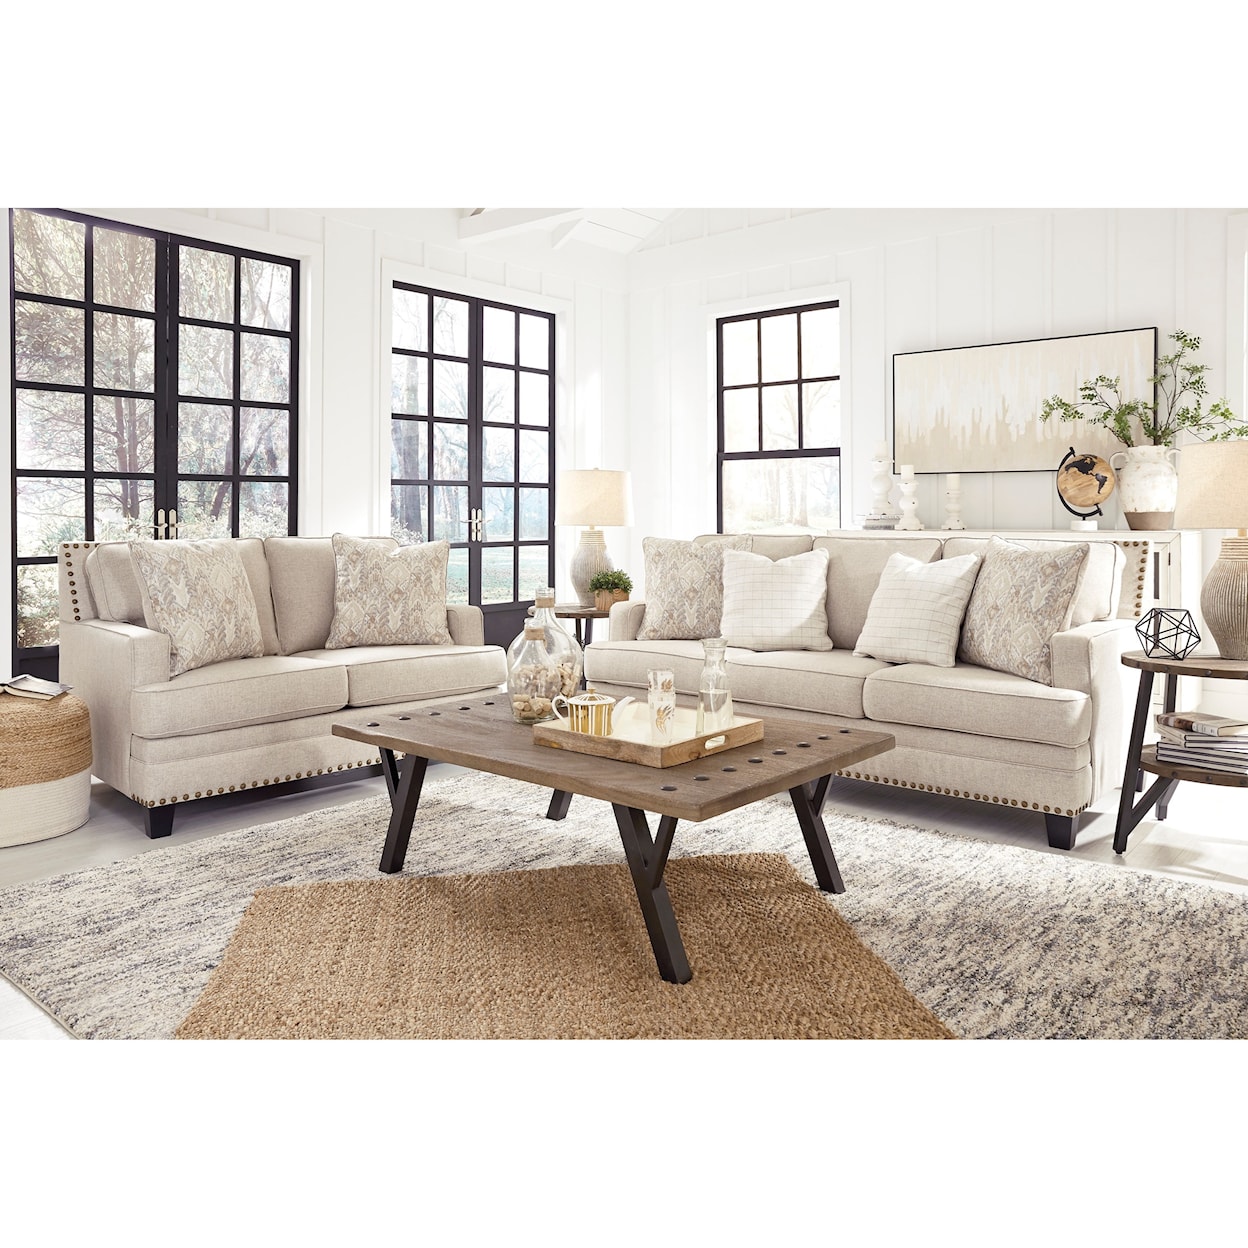 Benchcraft Claredon Living Room Group